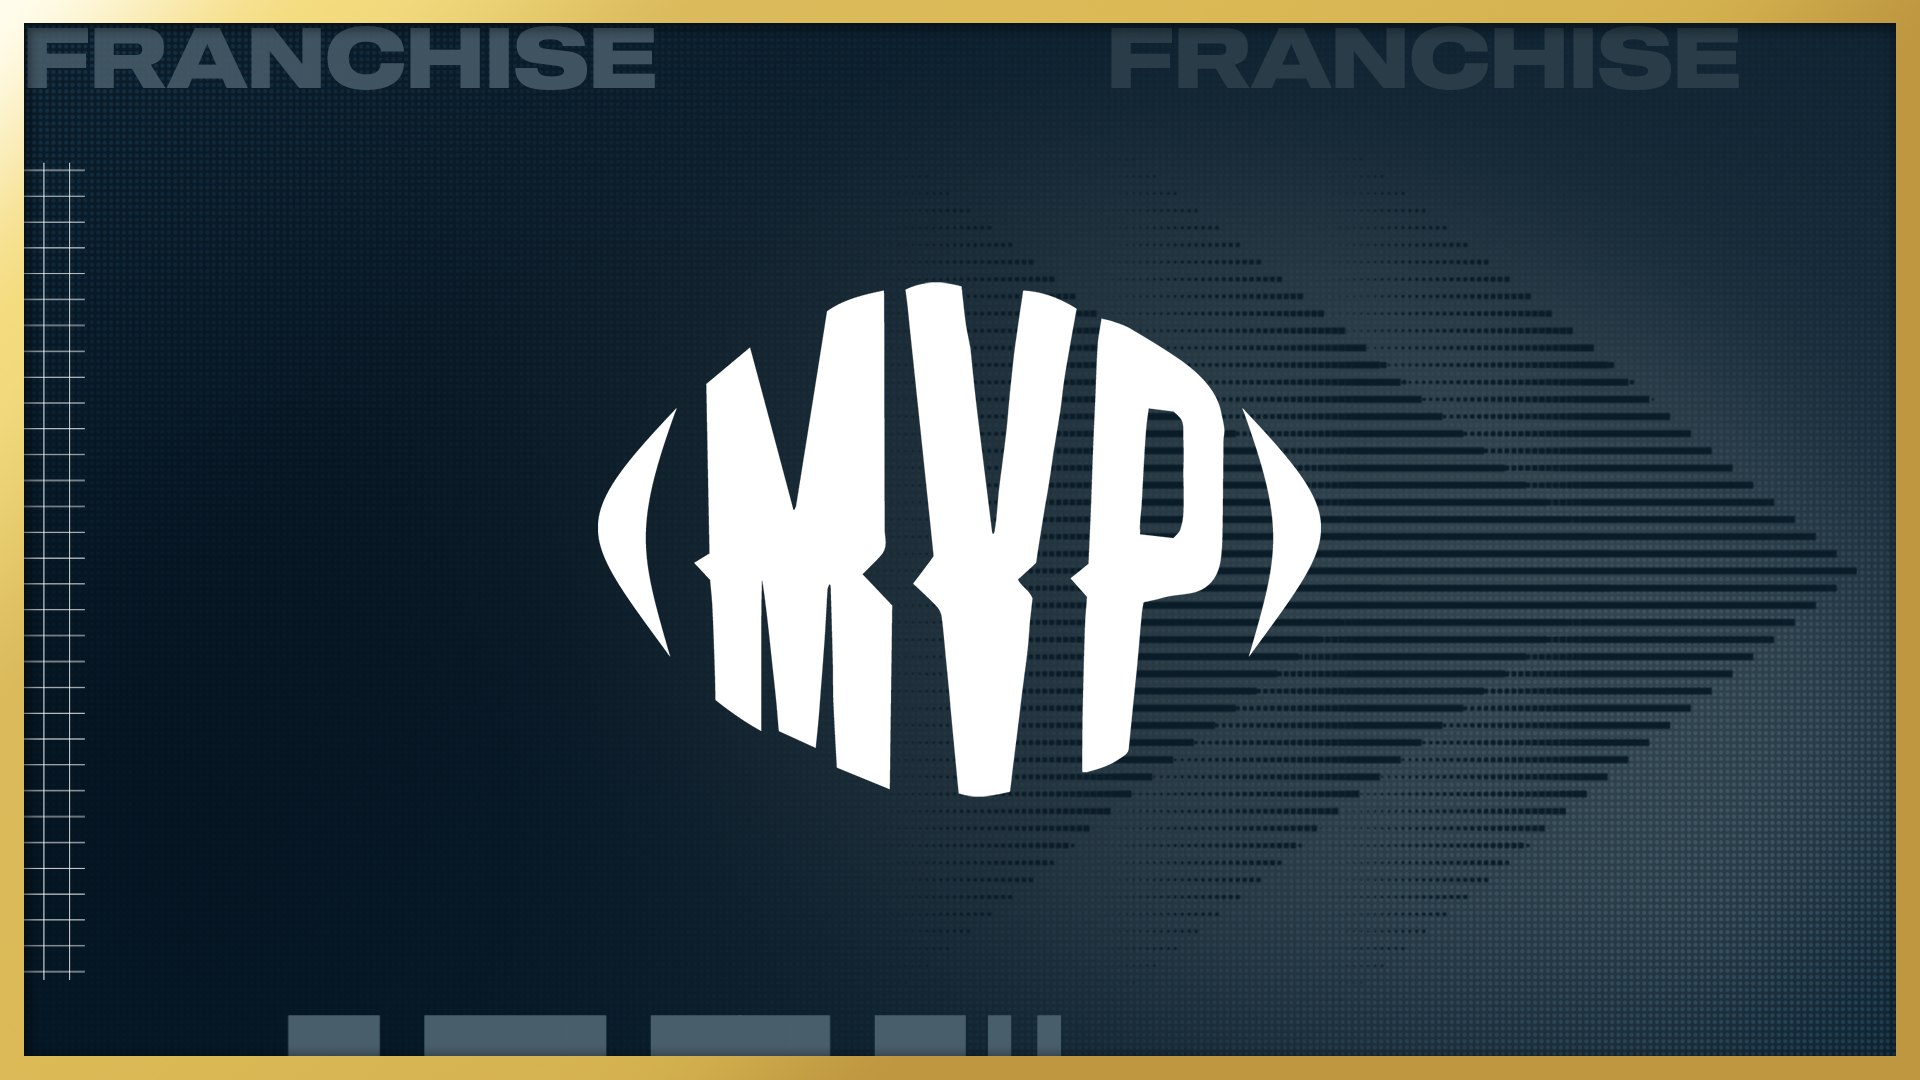 Icon for MVP